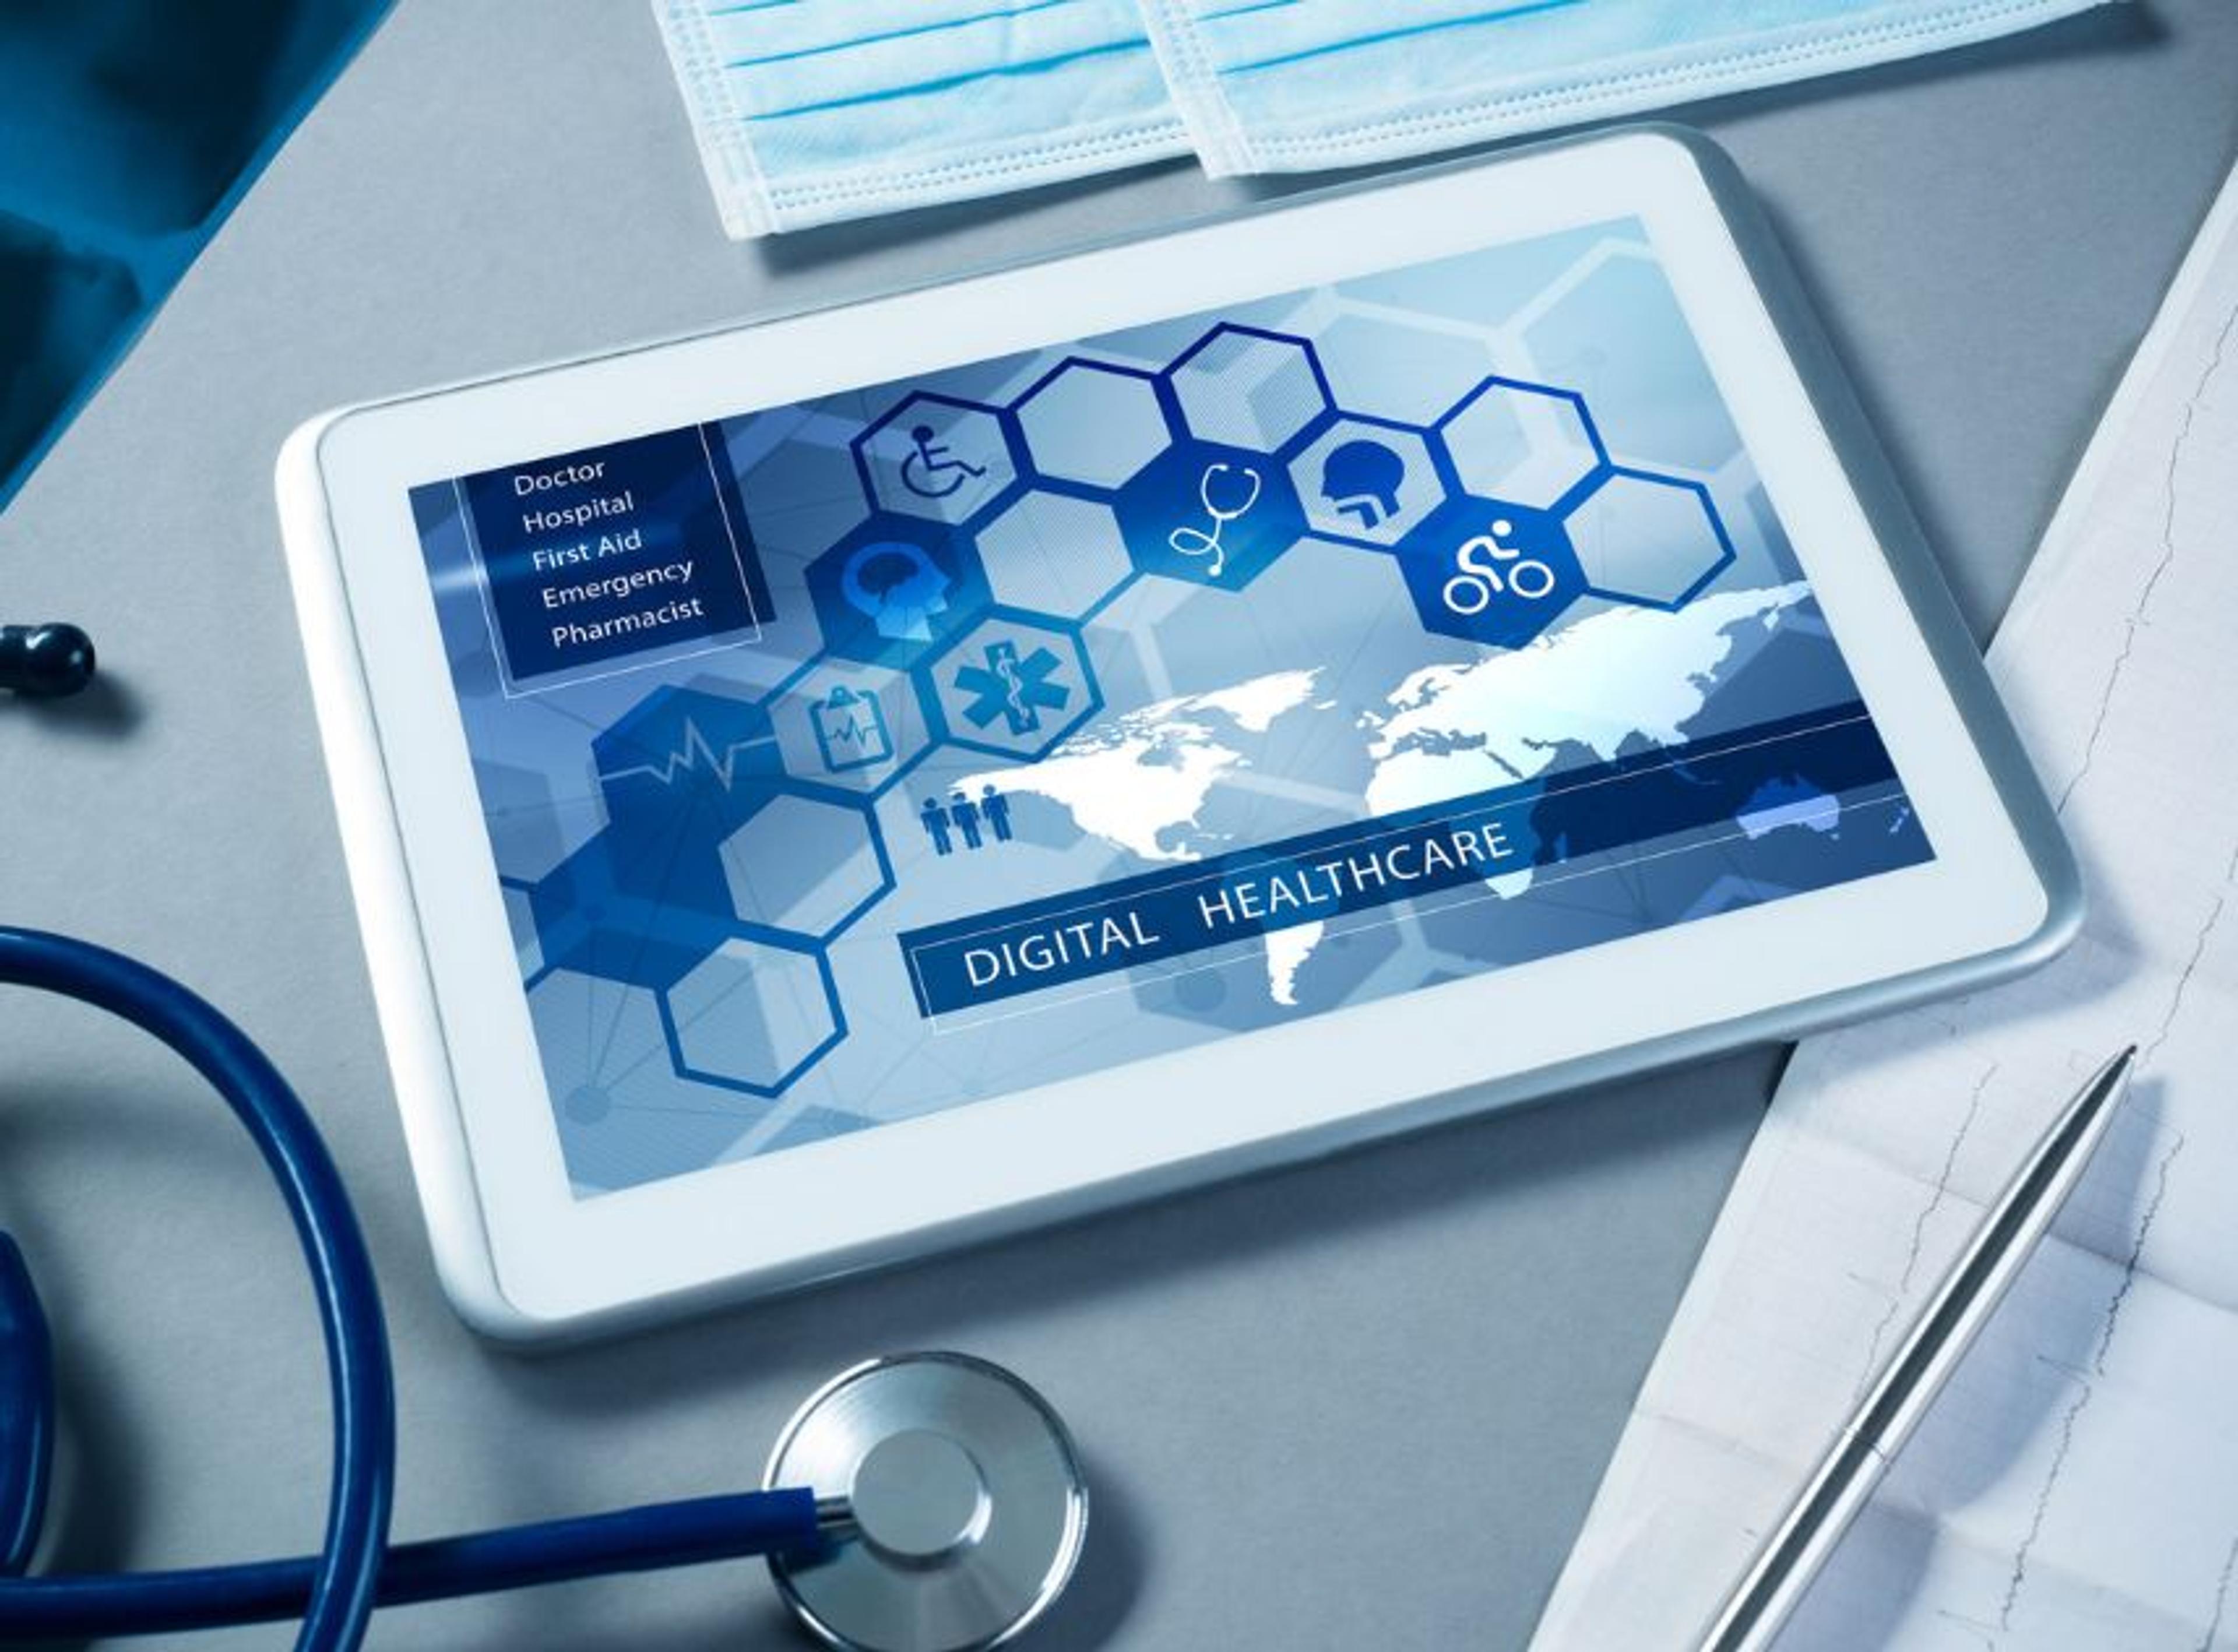 Digital transformation in healthcare ipad and stethoscope